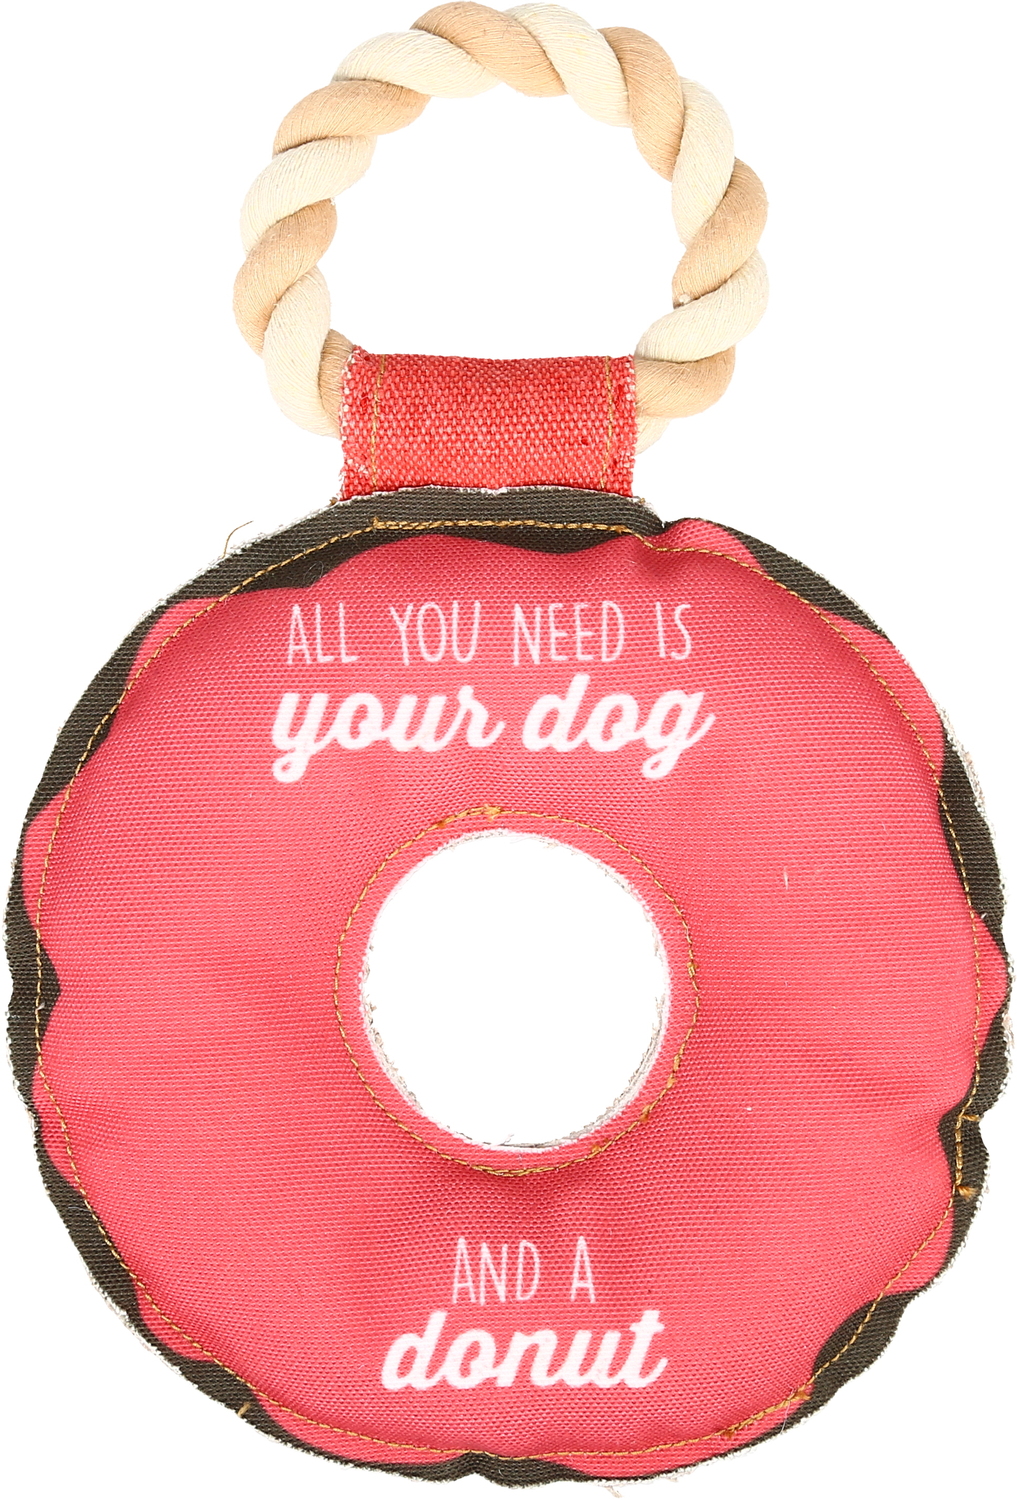 Dog and a Donut by Pavilion's Pets - Dog and a Donut - 10.75" Canvas Dog Toy on Rope